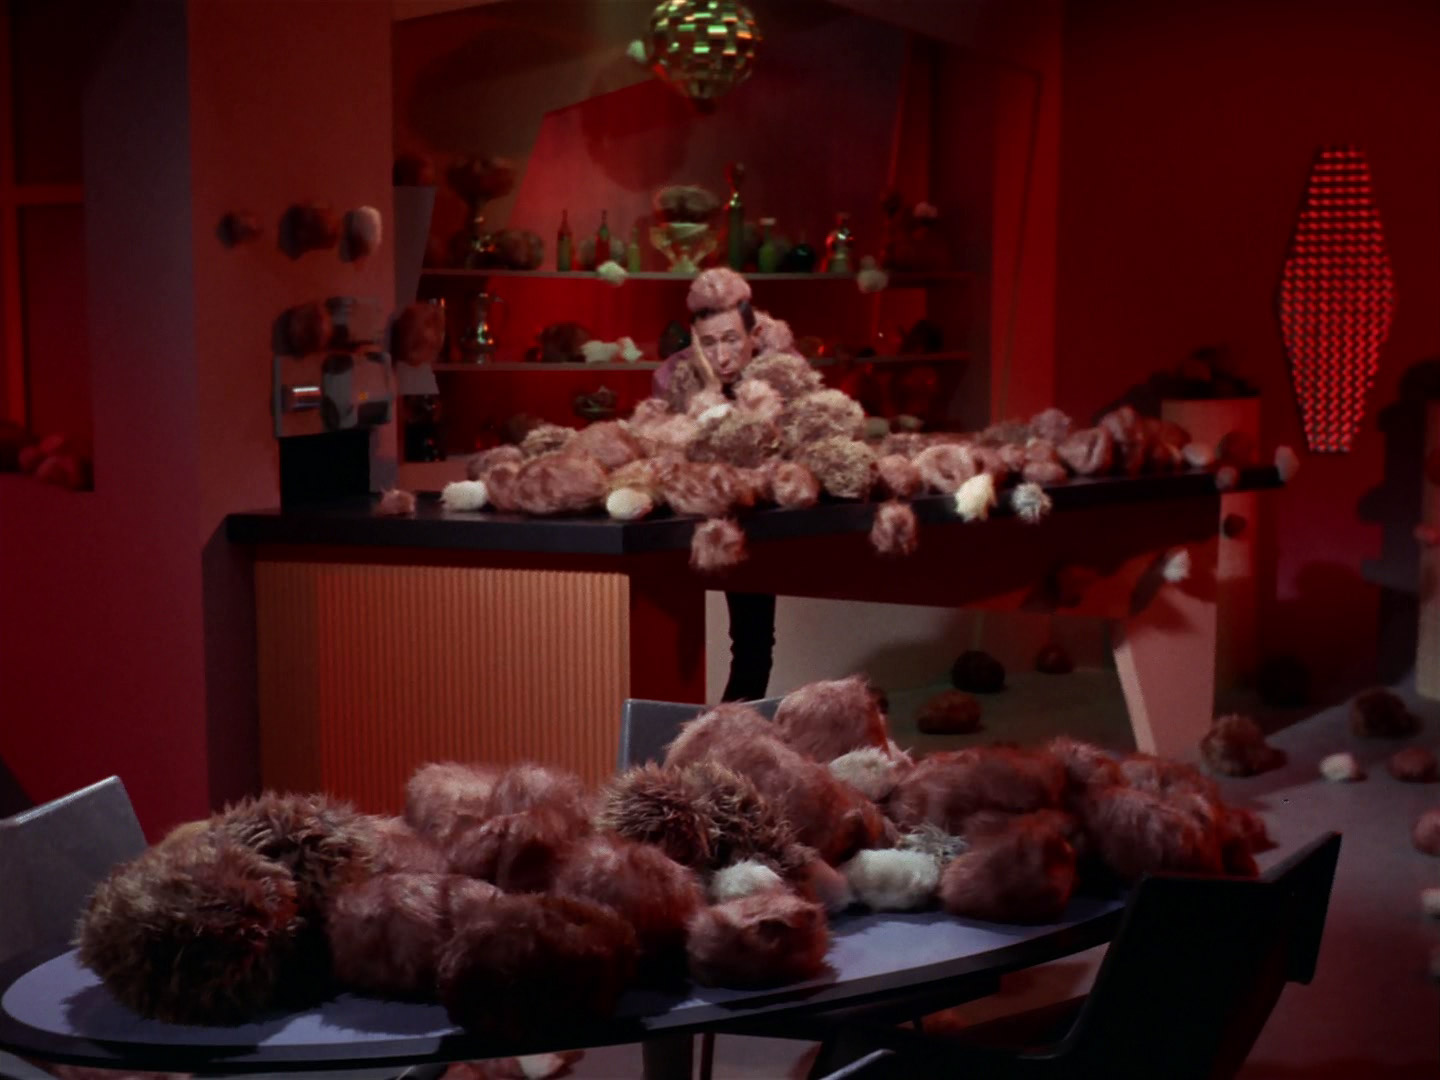 https://tos.trekcore.com/gallery/albums/screencaps/season2/213-trouble-with-tribbles/trouble-with-tribbles-836.jpg